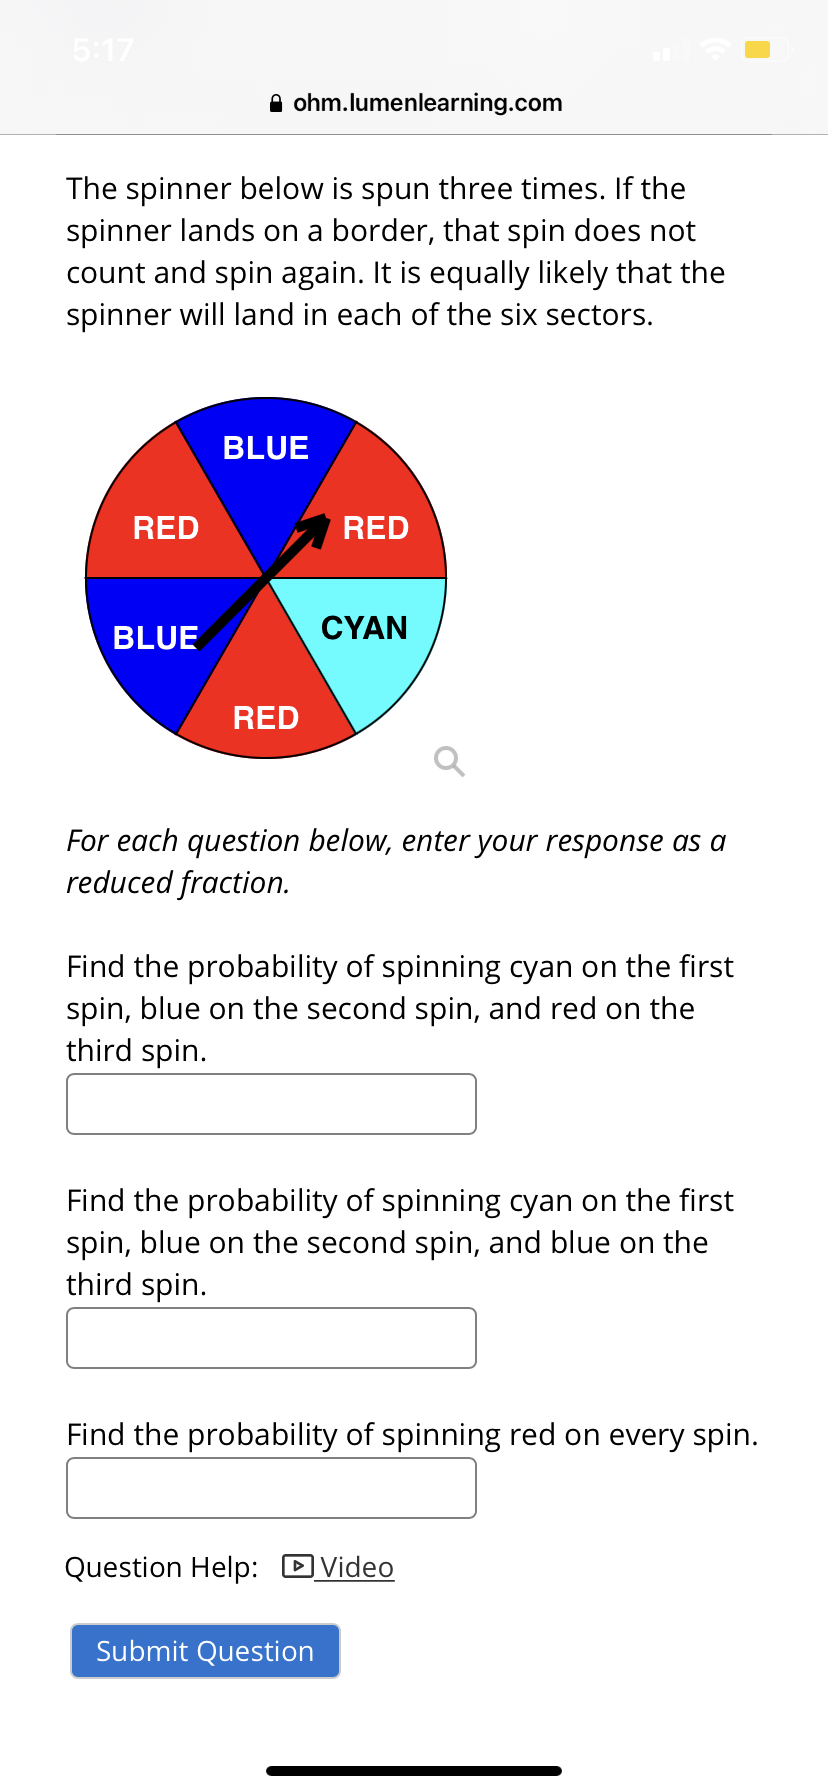 5:17
A ohm.lumenlearning.com
The spinner below is spun three times. If the
spinner lands on a border, that spin does not
count and spin again. It is equally likely that the
spinner will land in each of the six sectors.
BLUE
RED
RED
BLUE
CYAN
RED
For each question below, enter your response as a
reduced fraction.
Find the probability of spinning cyan on the first
spin, blue on the second spin, and red on the
third spin.
Find the probability of spinning cyan on the first
spin, blue on the second spin, and blue on the
third spin.
Find the probability of spinning red on every spin.
Question Help: DVideo
Submit Question
